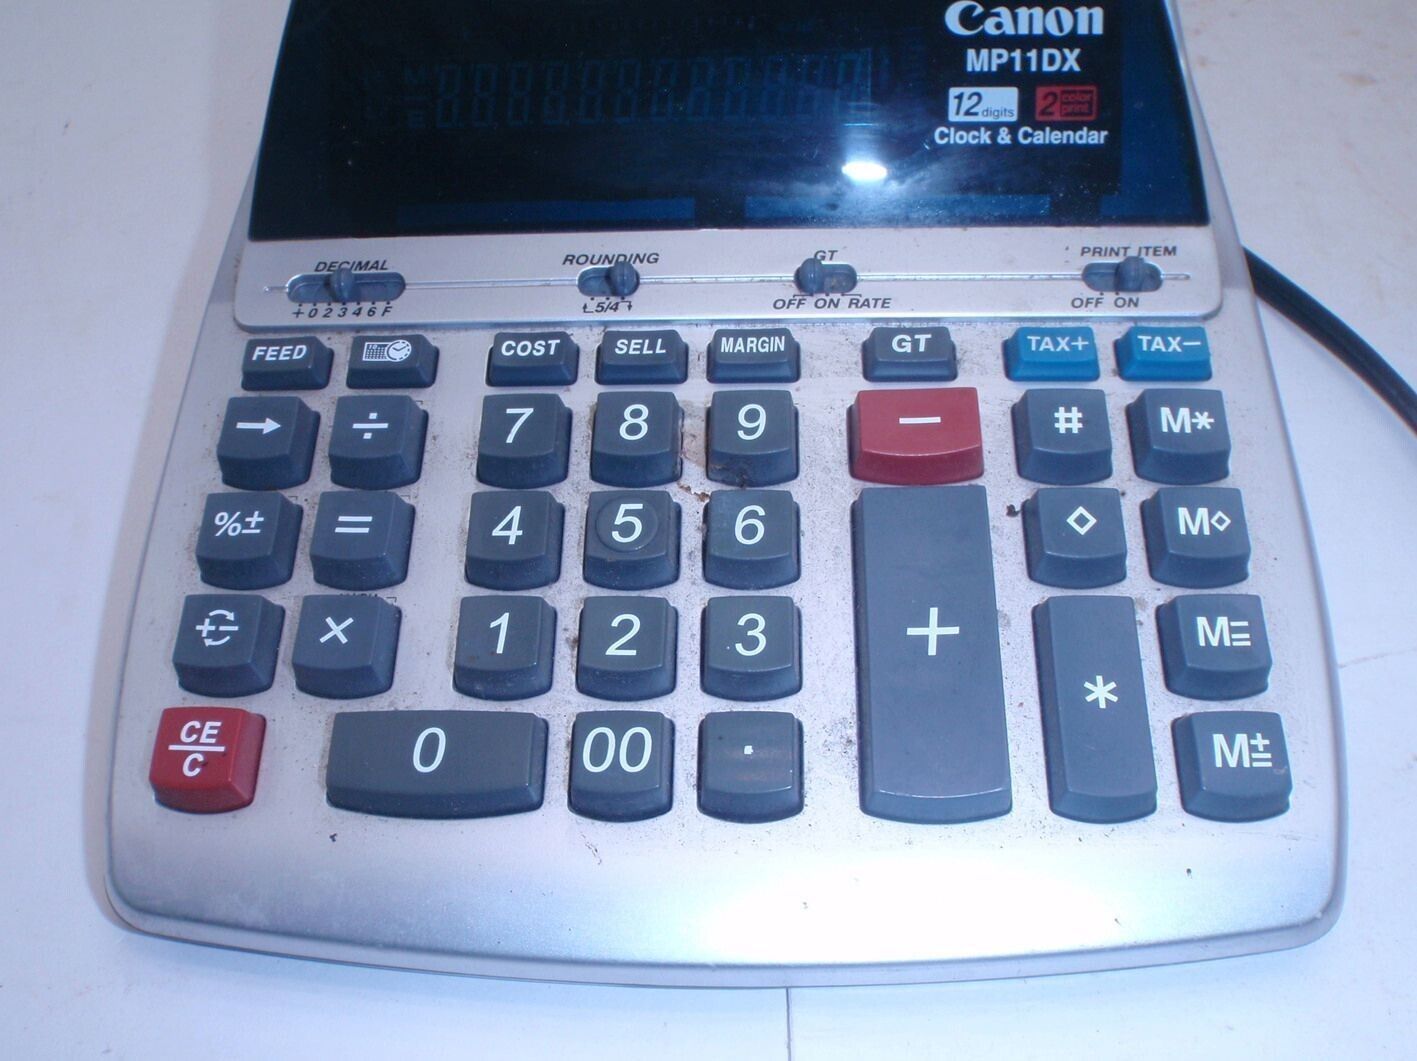 Primary image for Canon MP11DX Printing Calculator